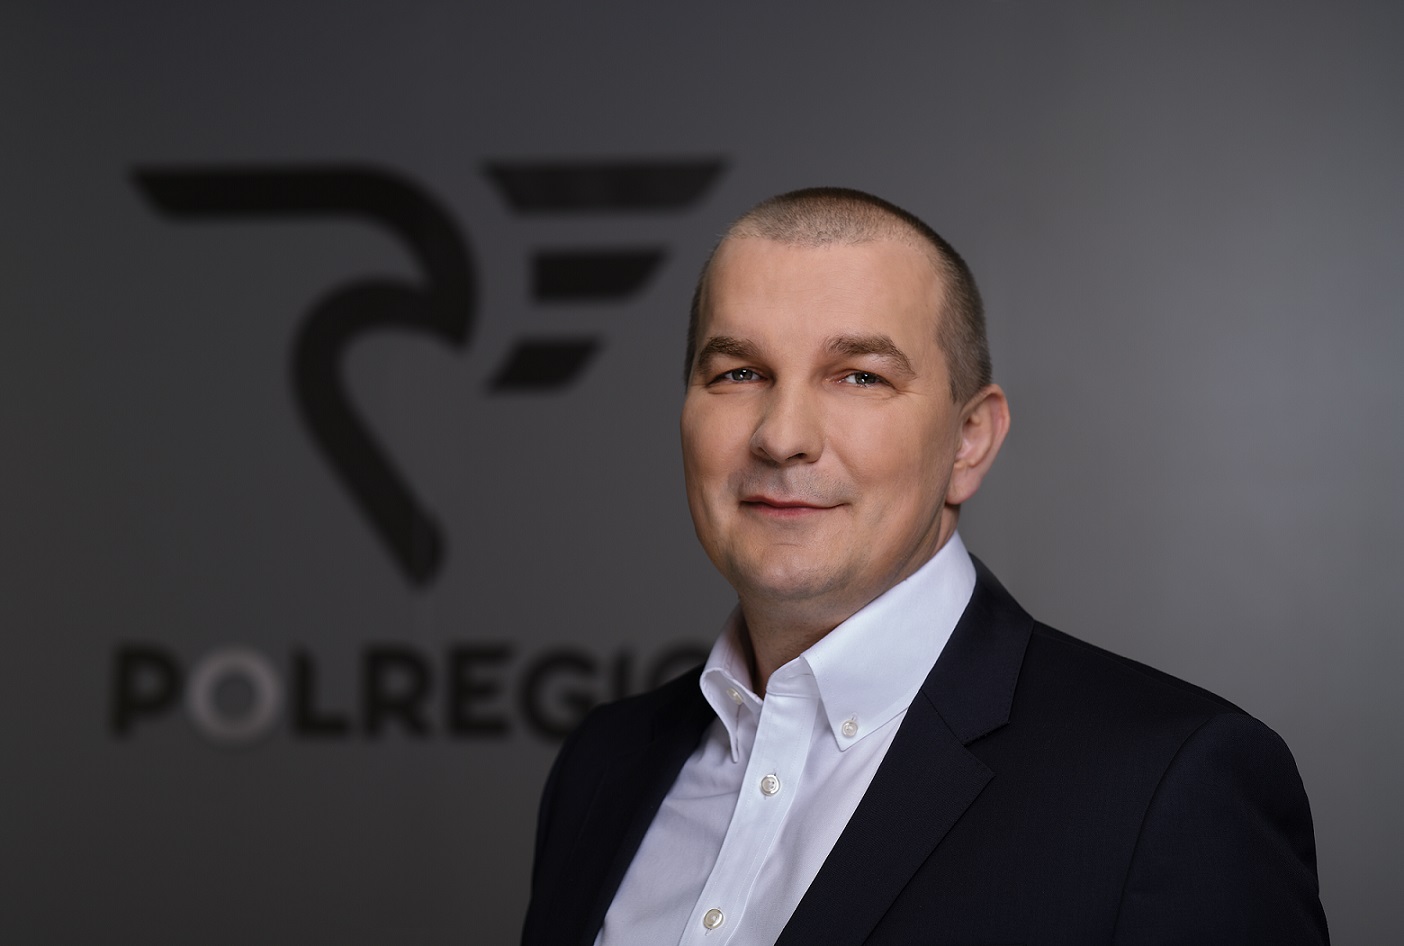 Polregio is not slowing down. Artur Martyniuk, Chairman of the Board of Polregio S.A.